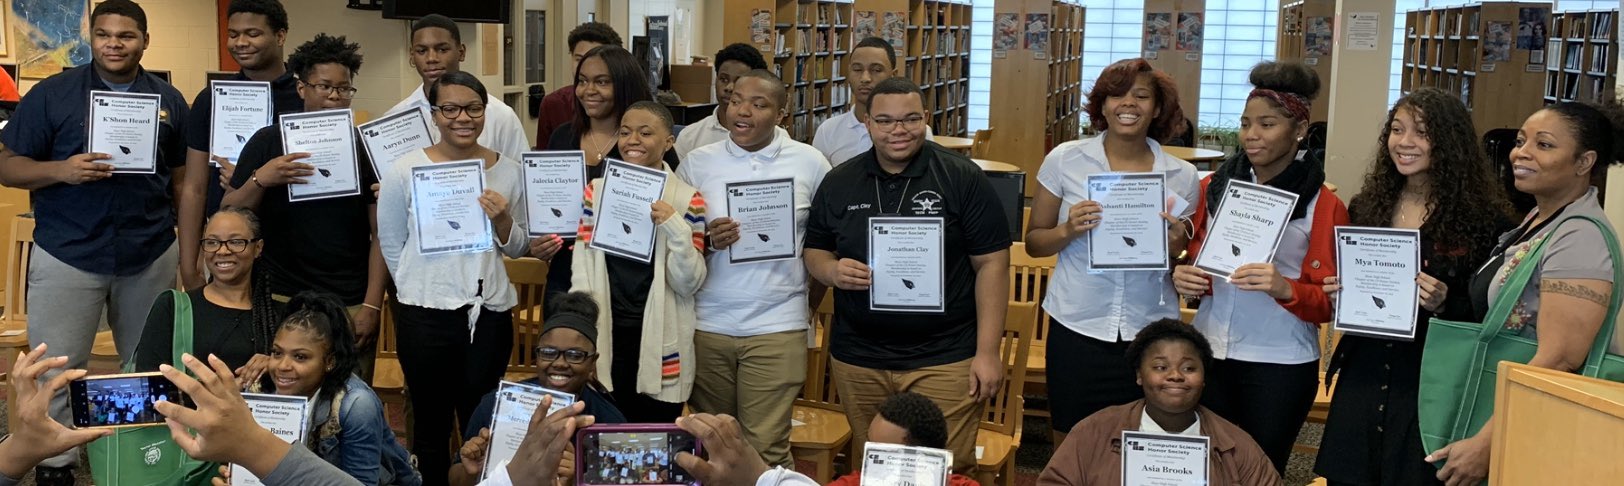 A class of black students in a library all holding up certificates of achievement - evidence of the success of being a warm demander